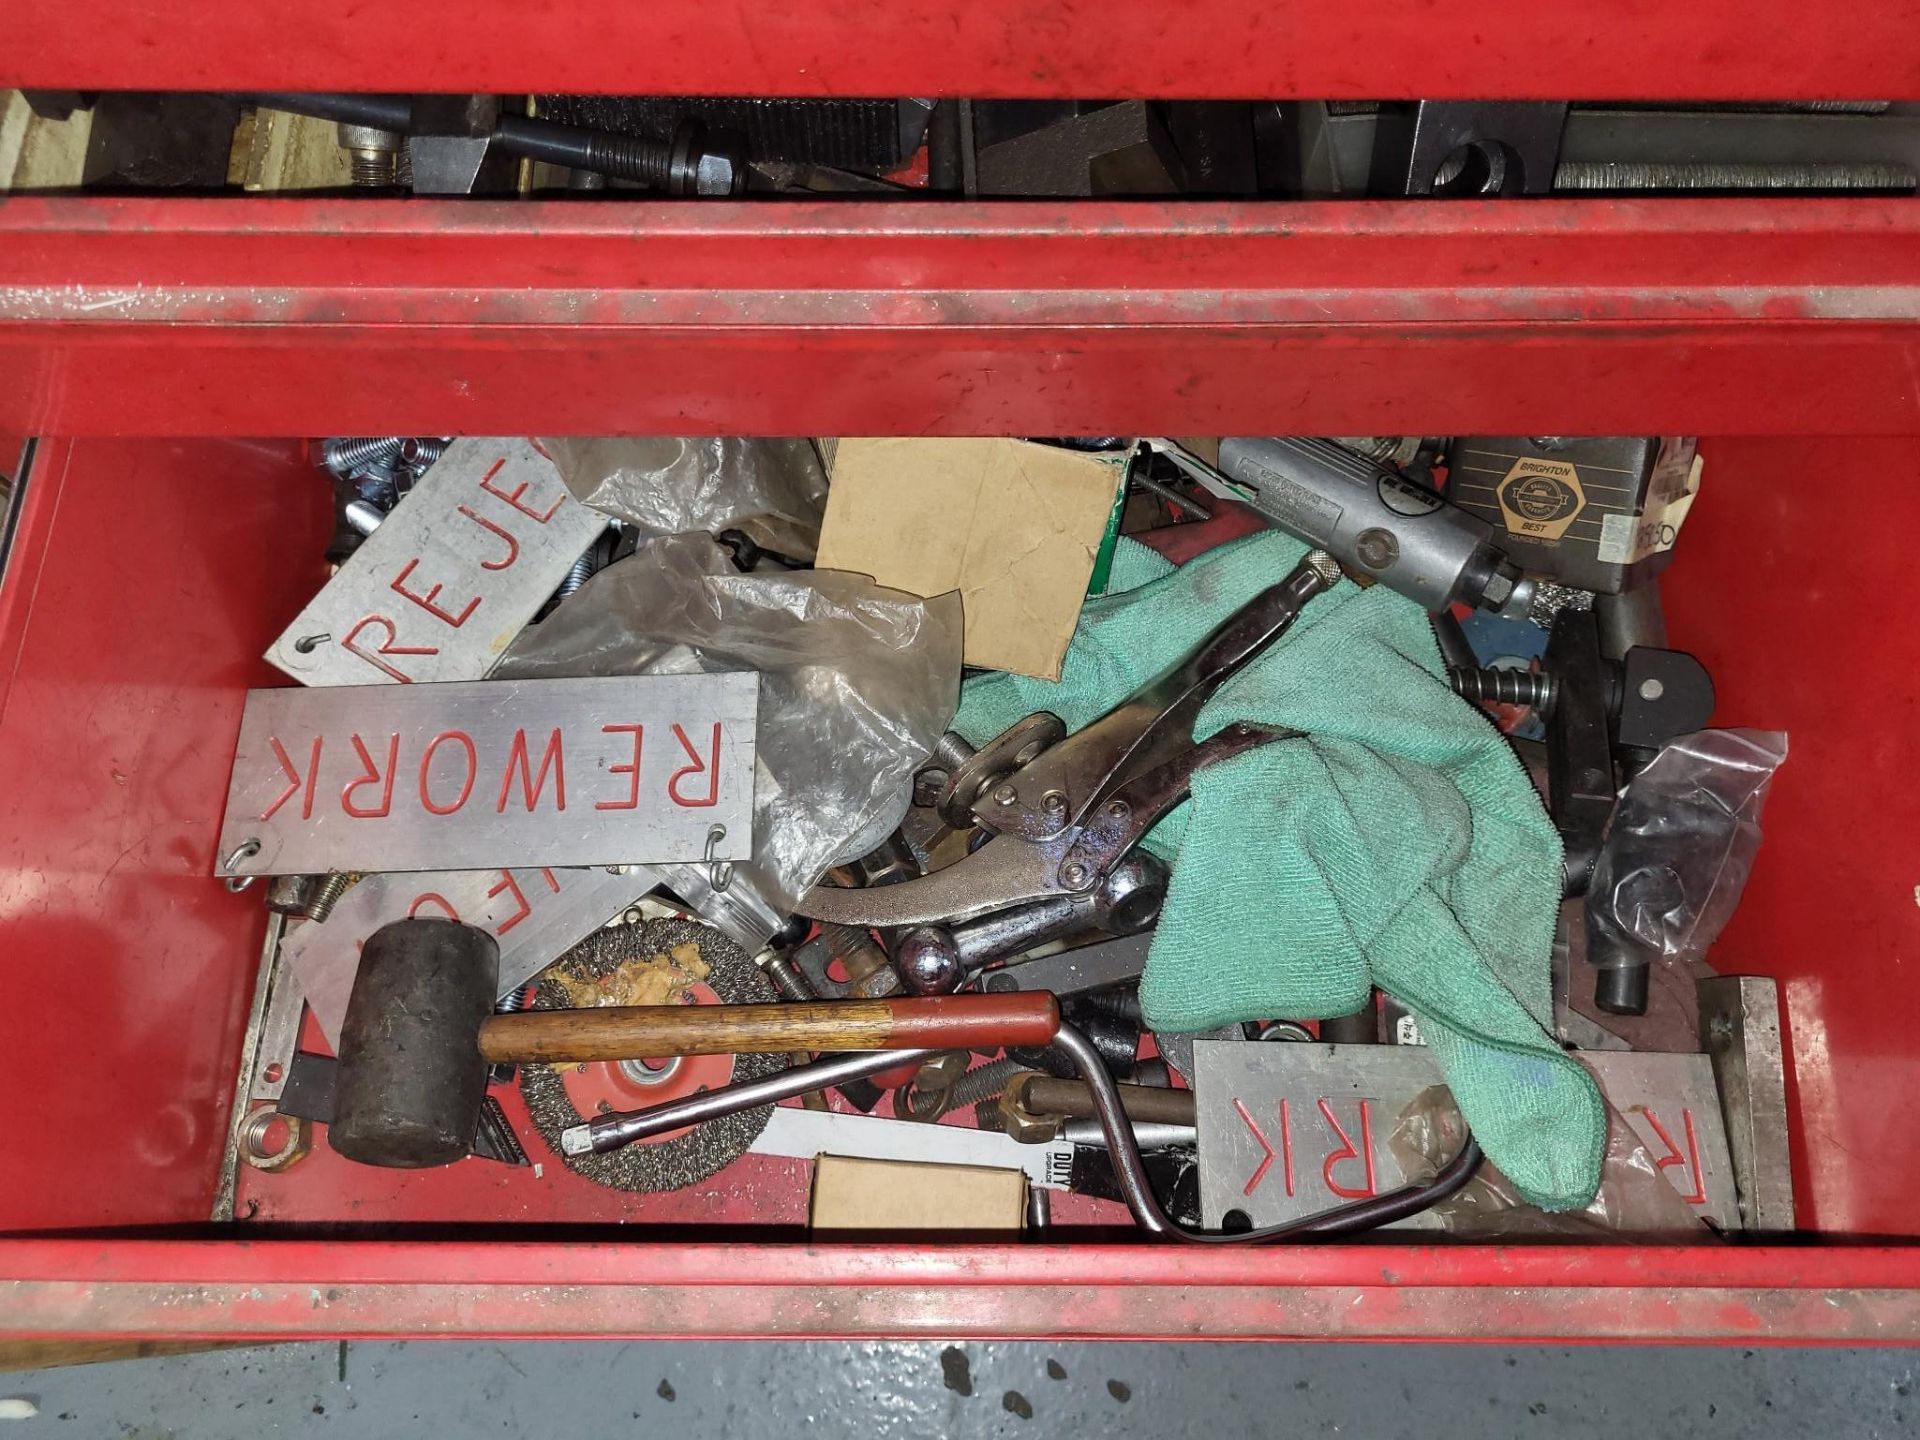 LARGE LOT OF MILLING TOOLS, TAPS, CARBIDE INSERTS, SETUP HARDWARE AND HAND TOOLS - Image 8 of 24